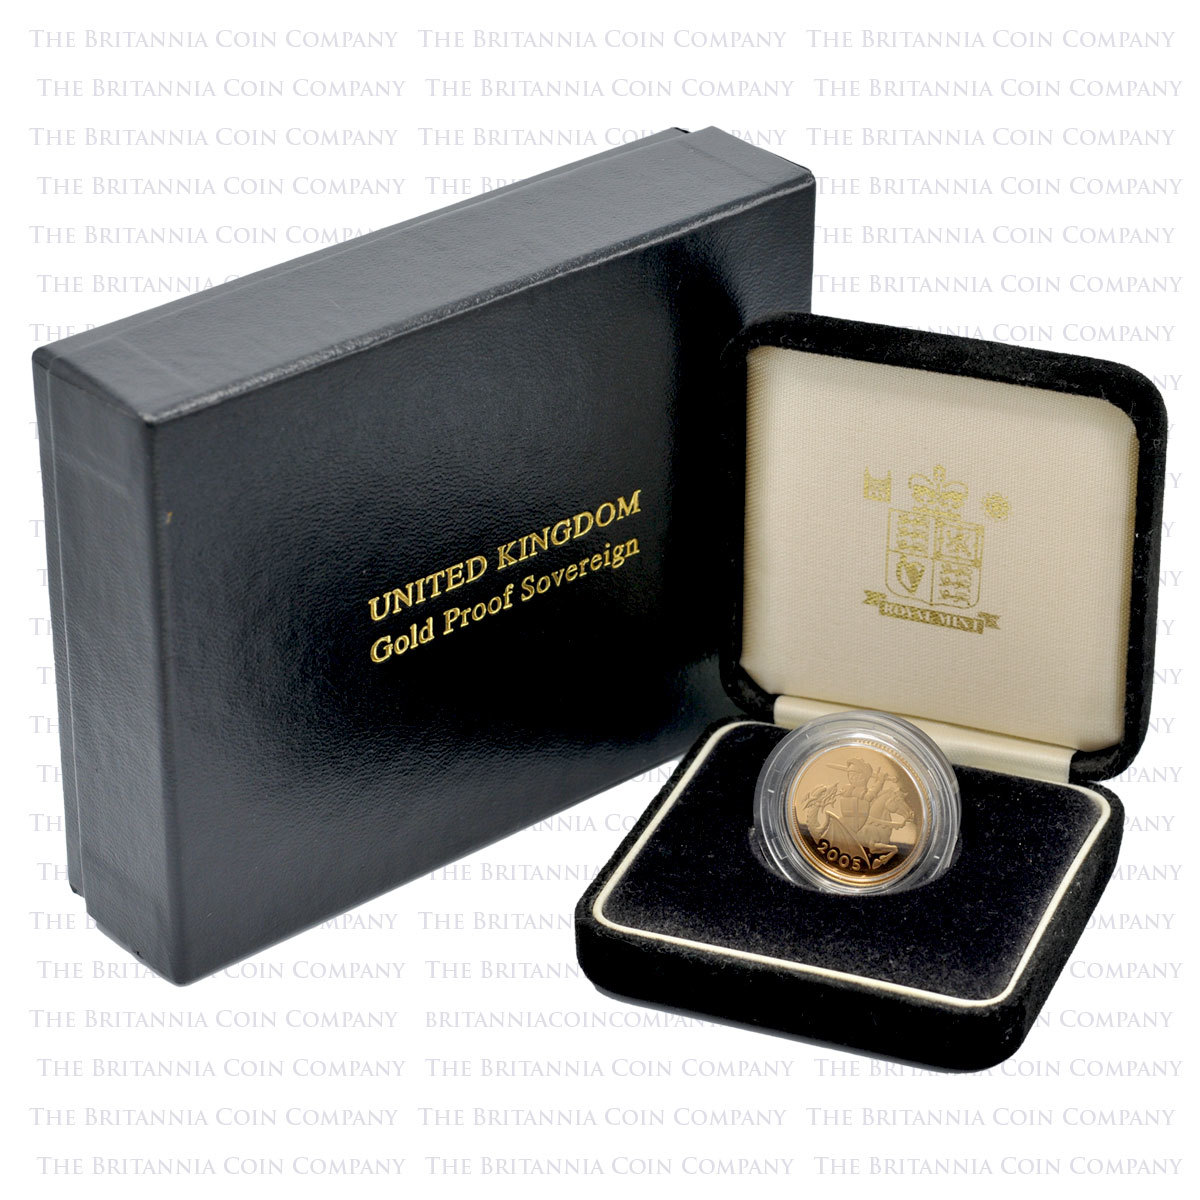 2005 Gold Proof Sovereign